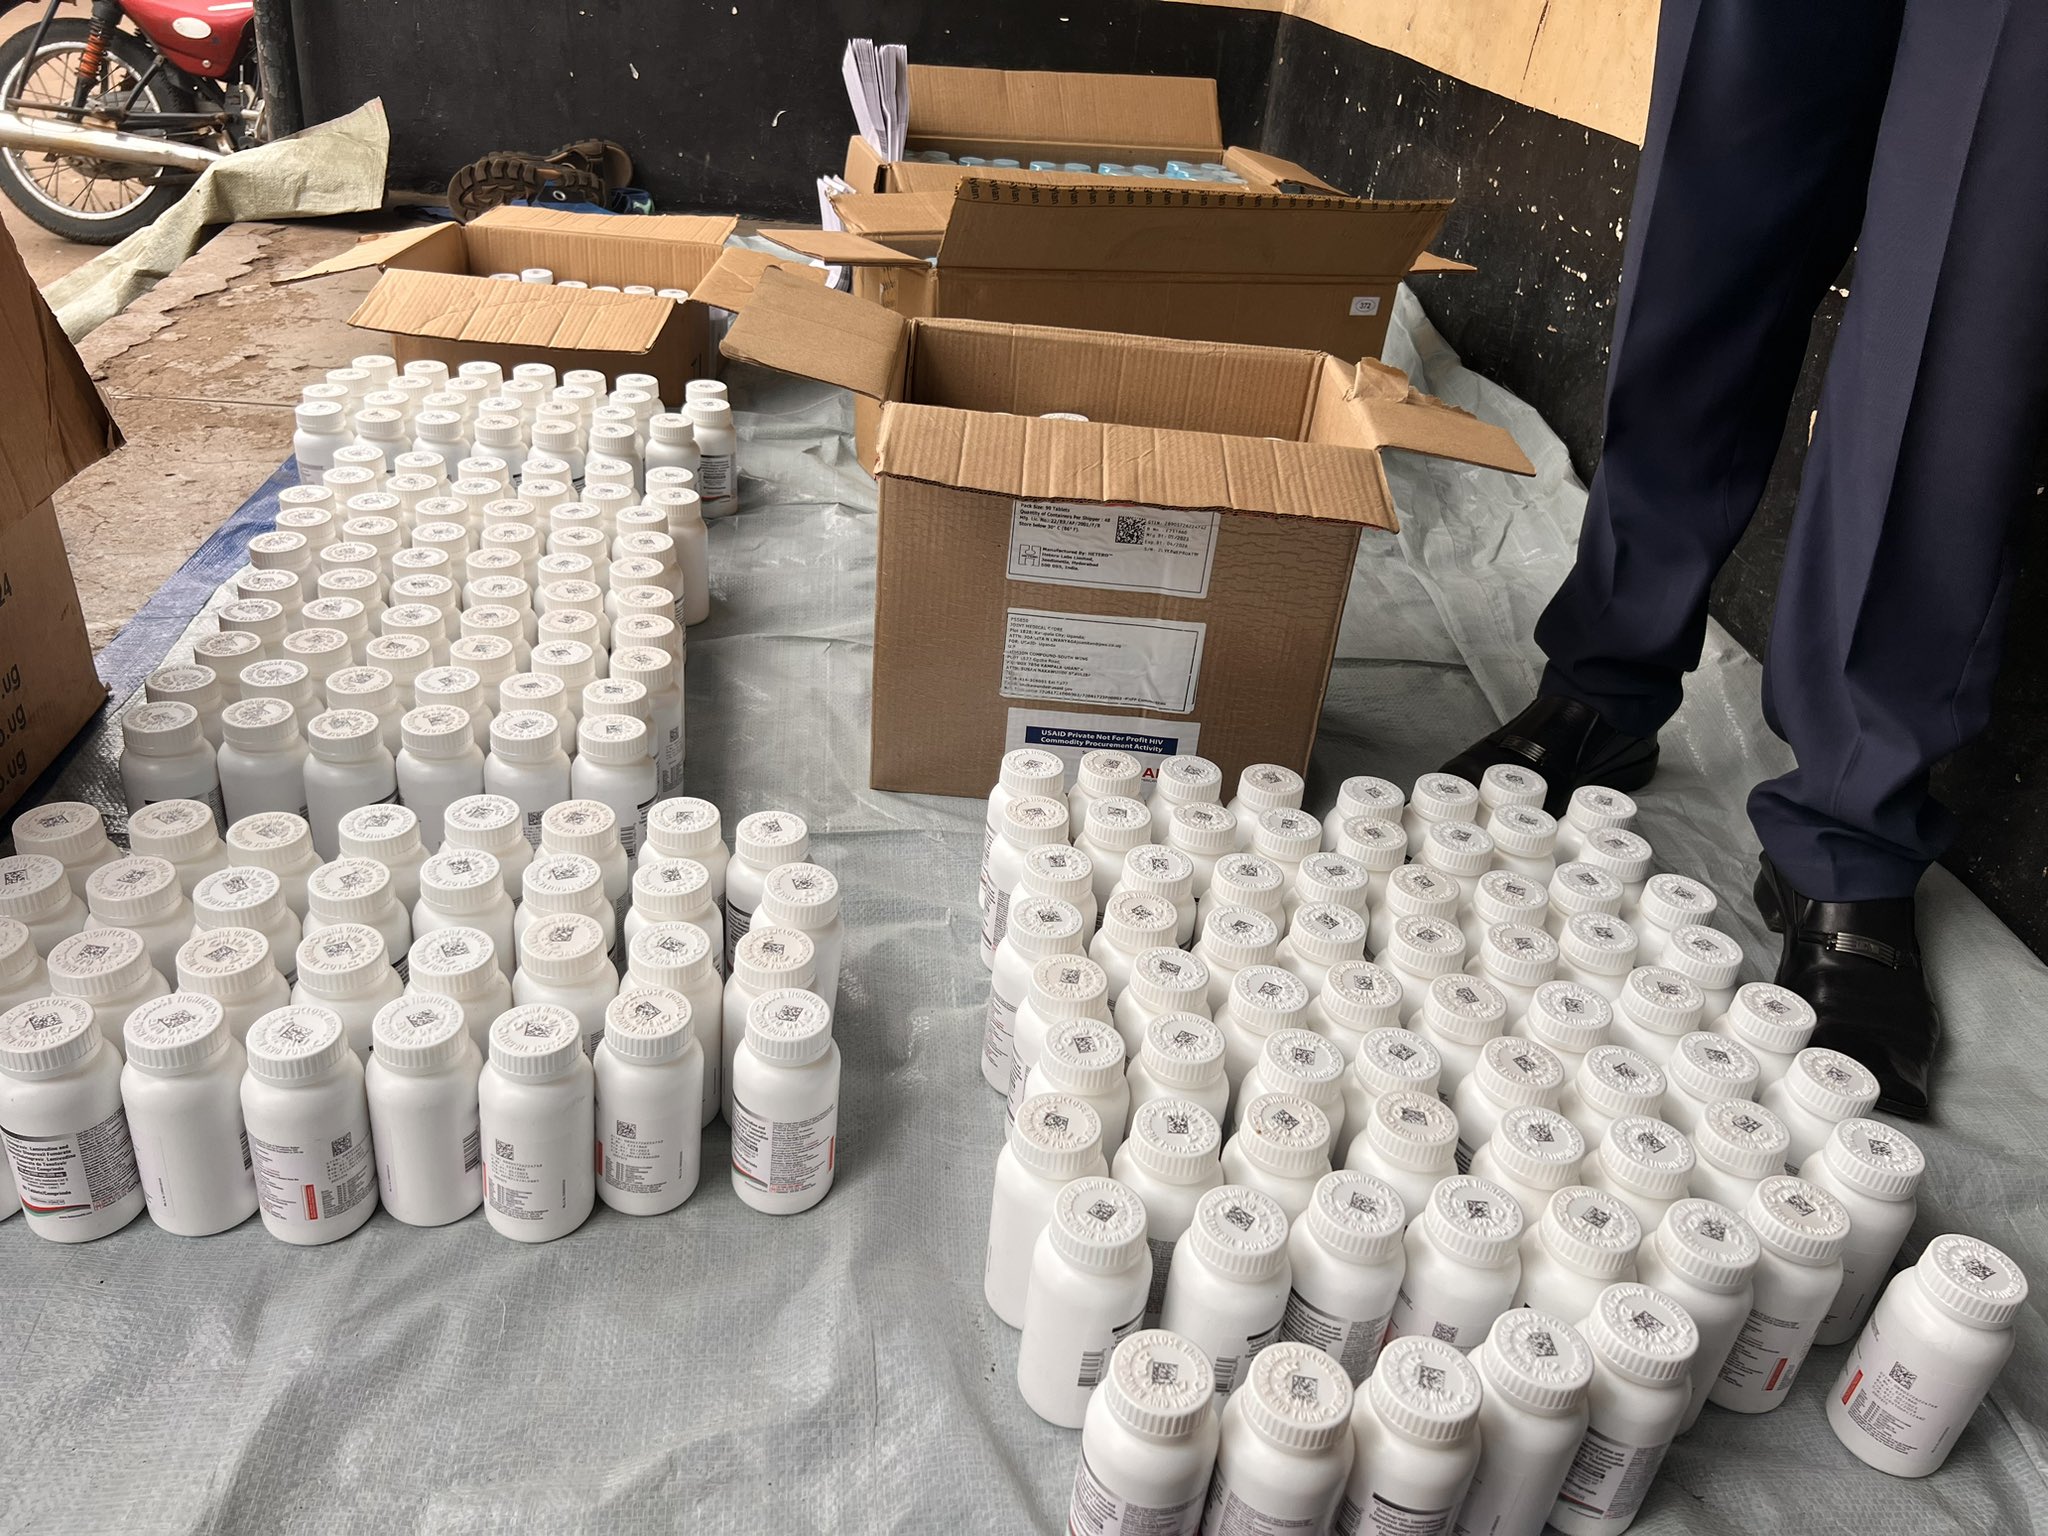 NDA Impounds 500 Tins of ARVS, Arrests Two Suspects